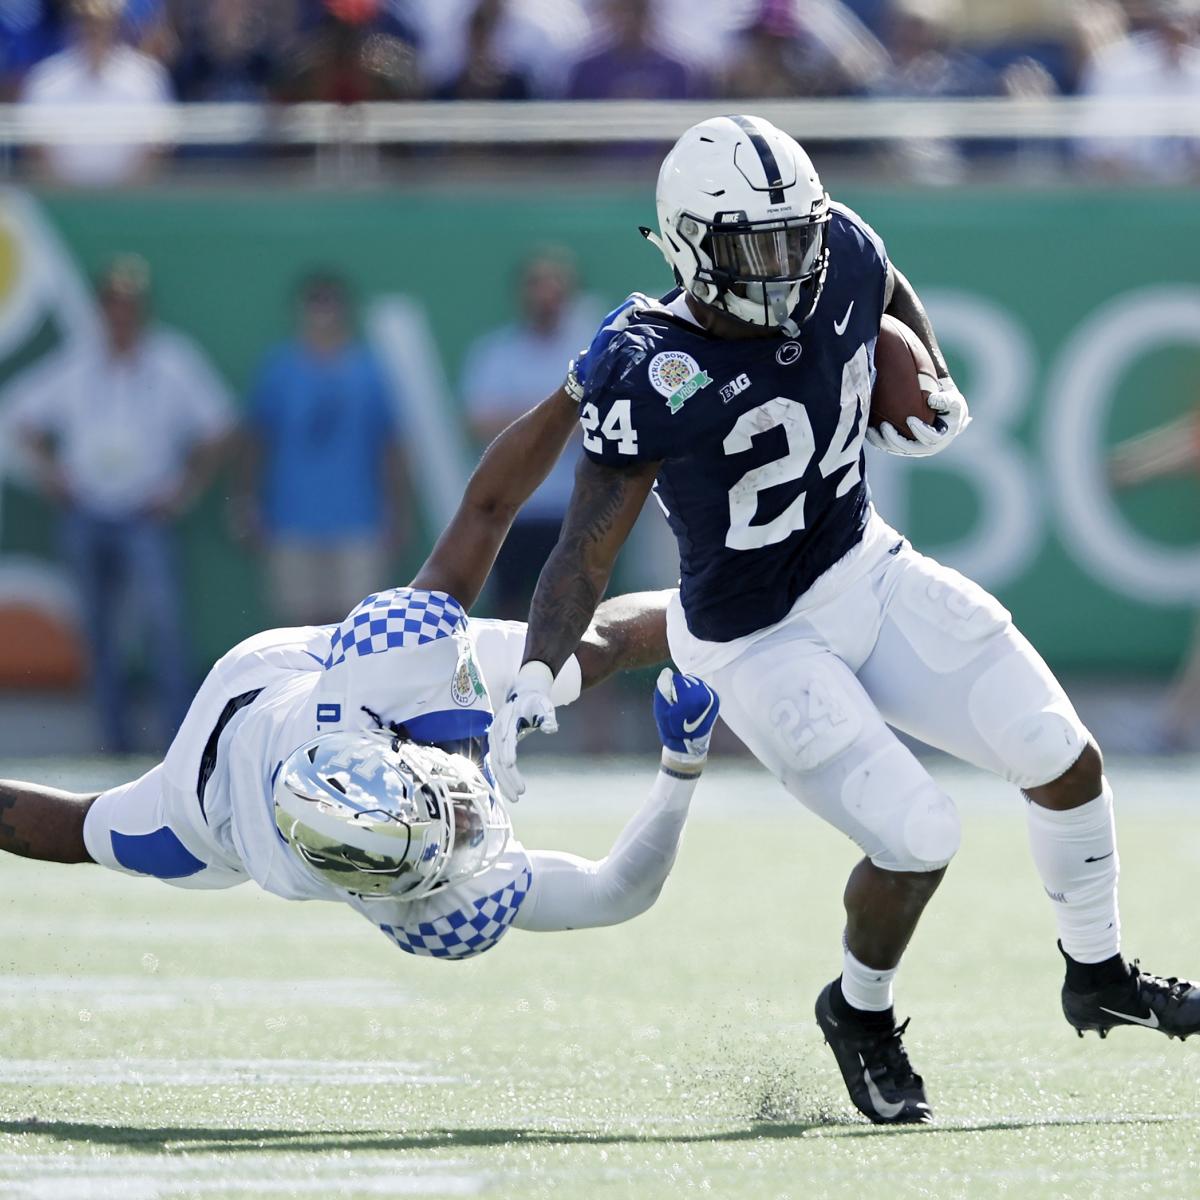 Top RB Prospects Miles Sanders and David Montgomery Join Stick to